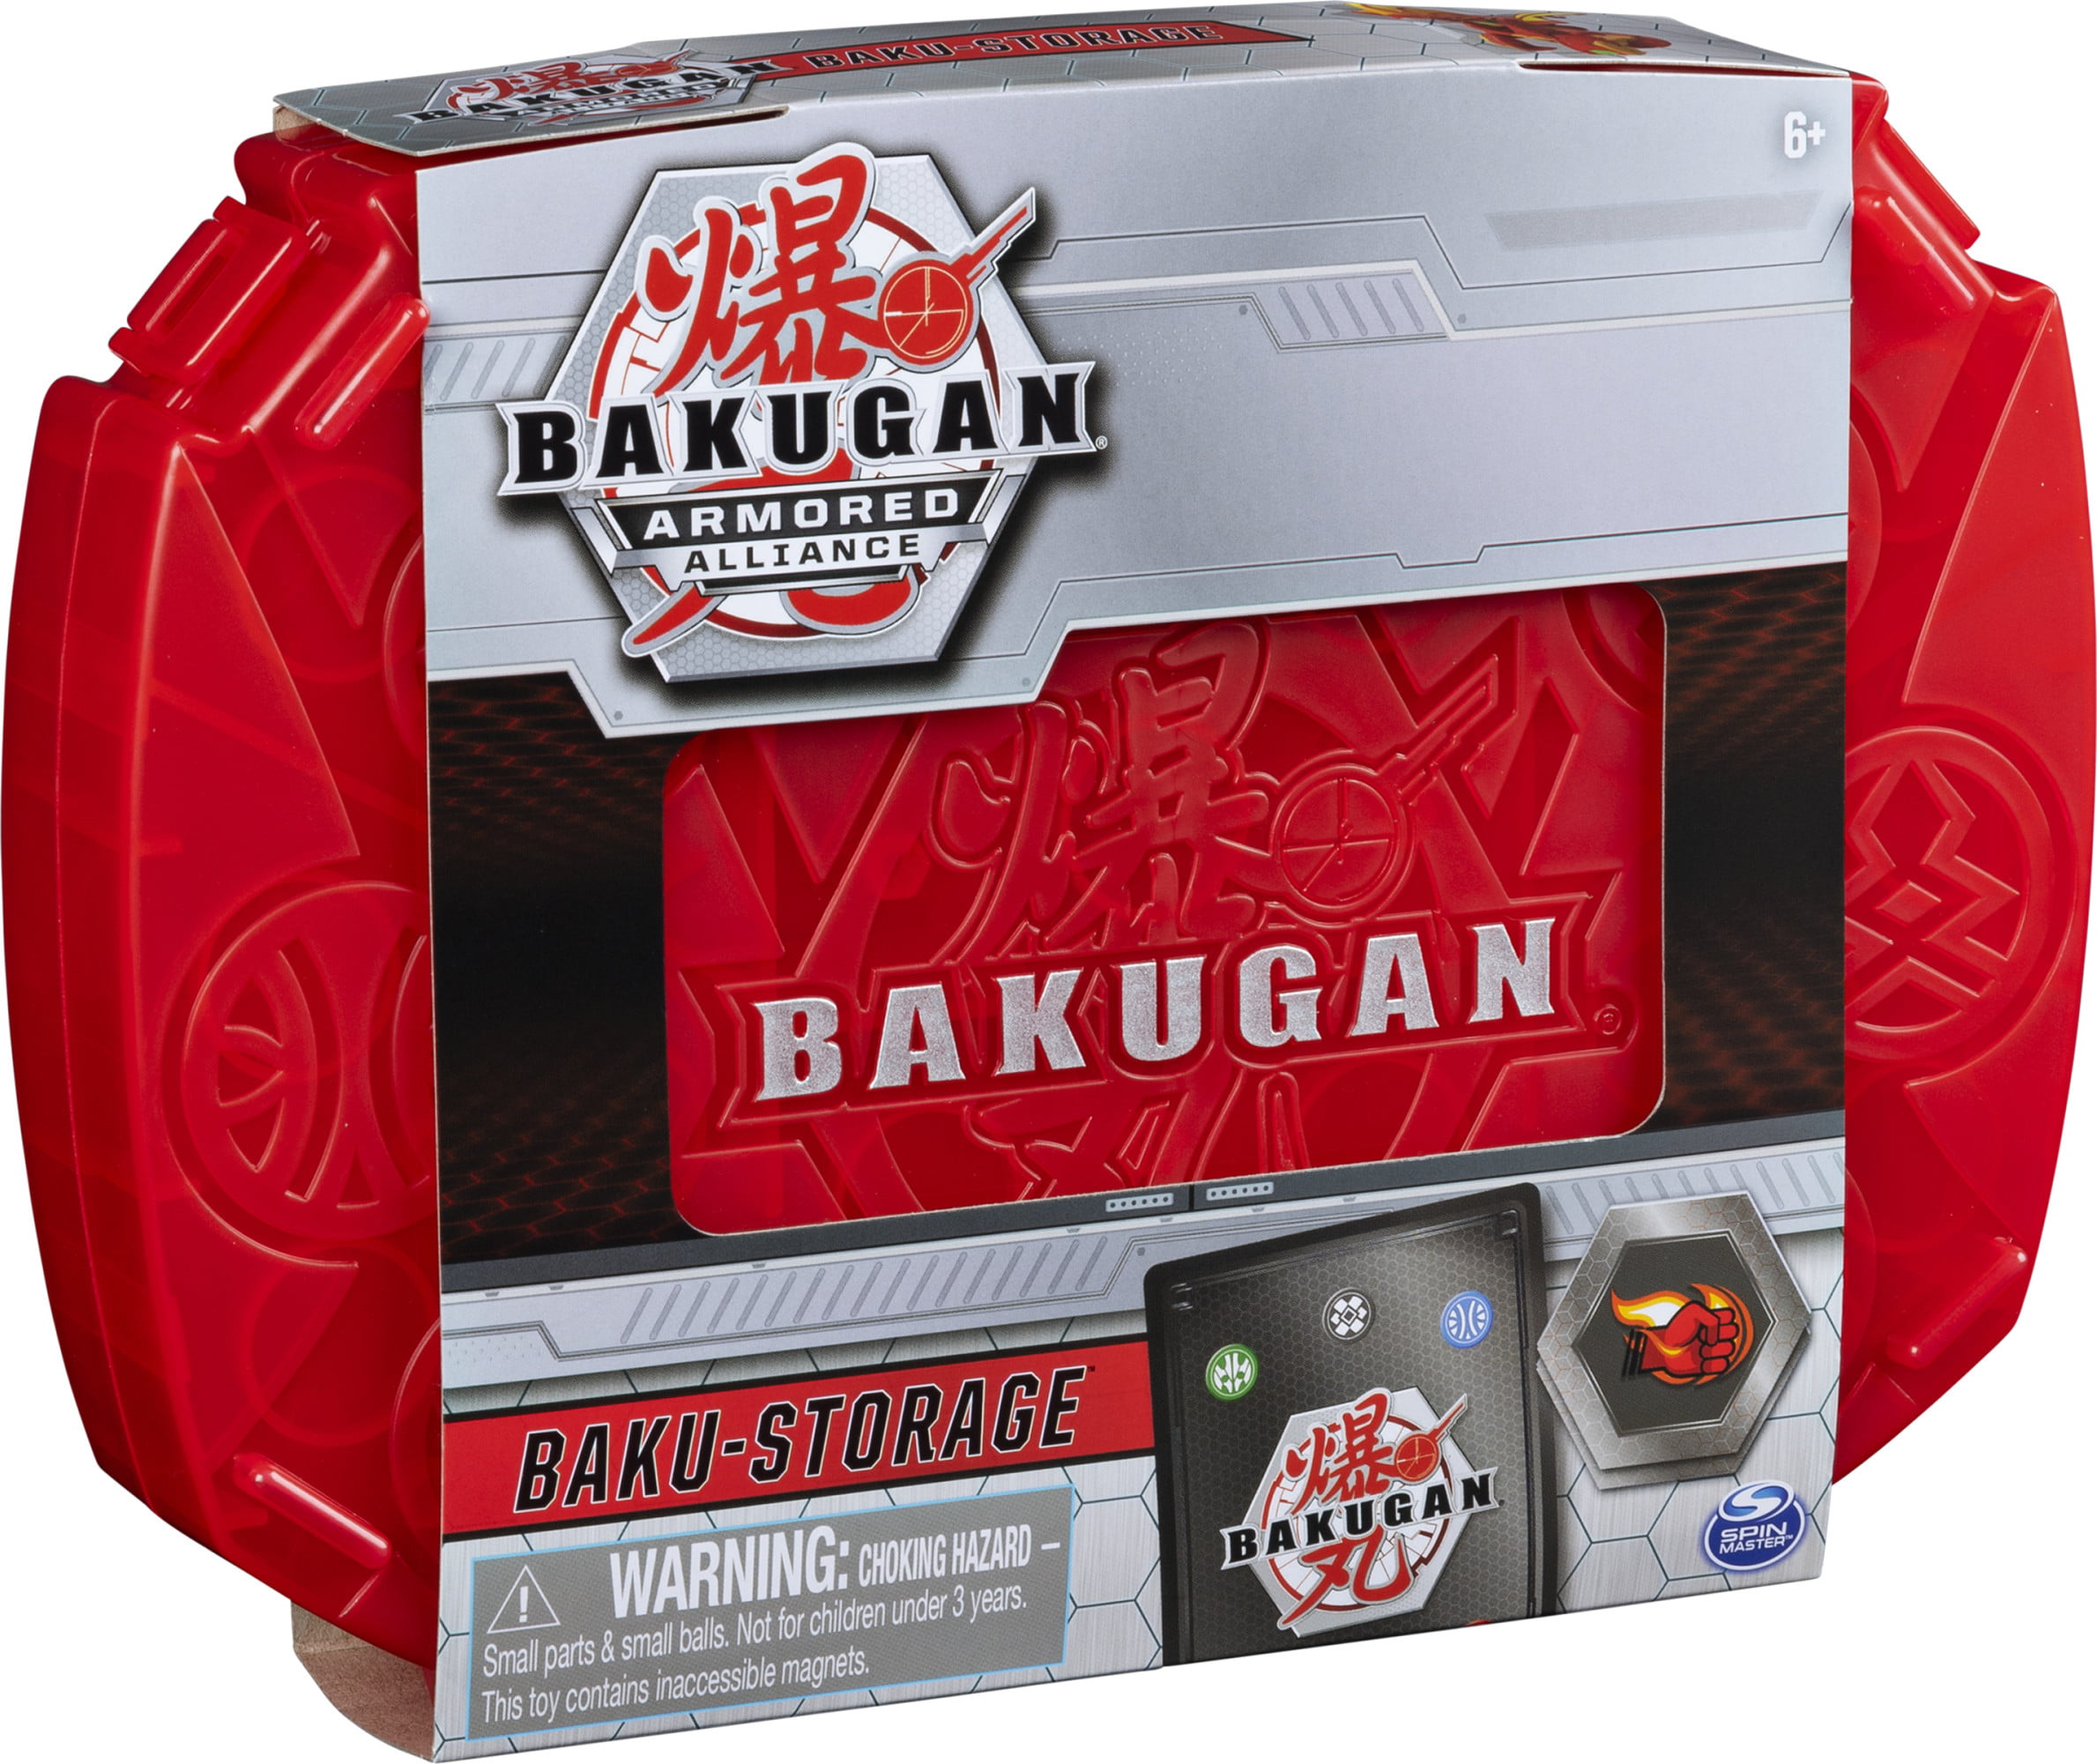 Baku-Storage Case Collectible Action Figures Red for Ages 6 and Up 